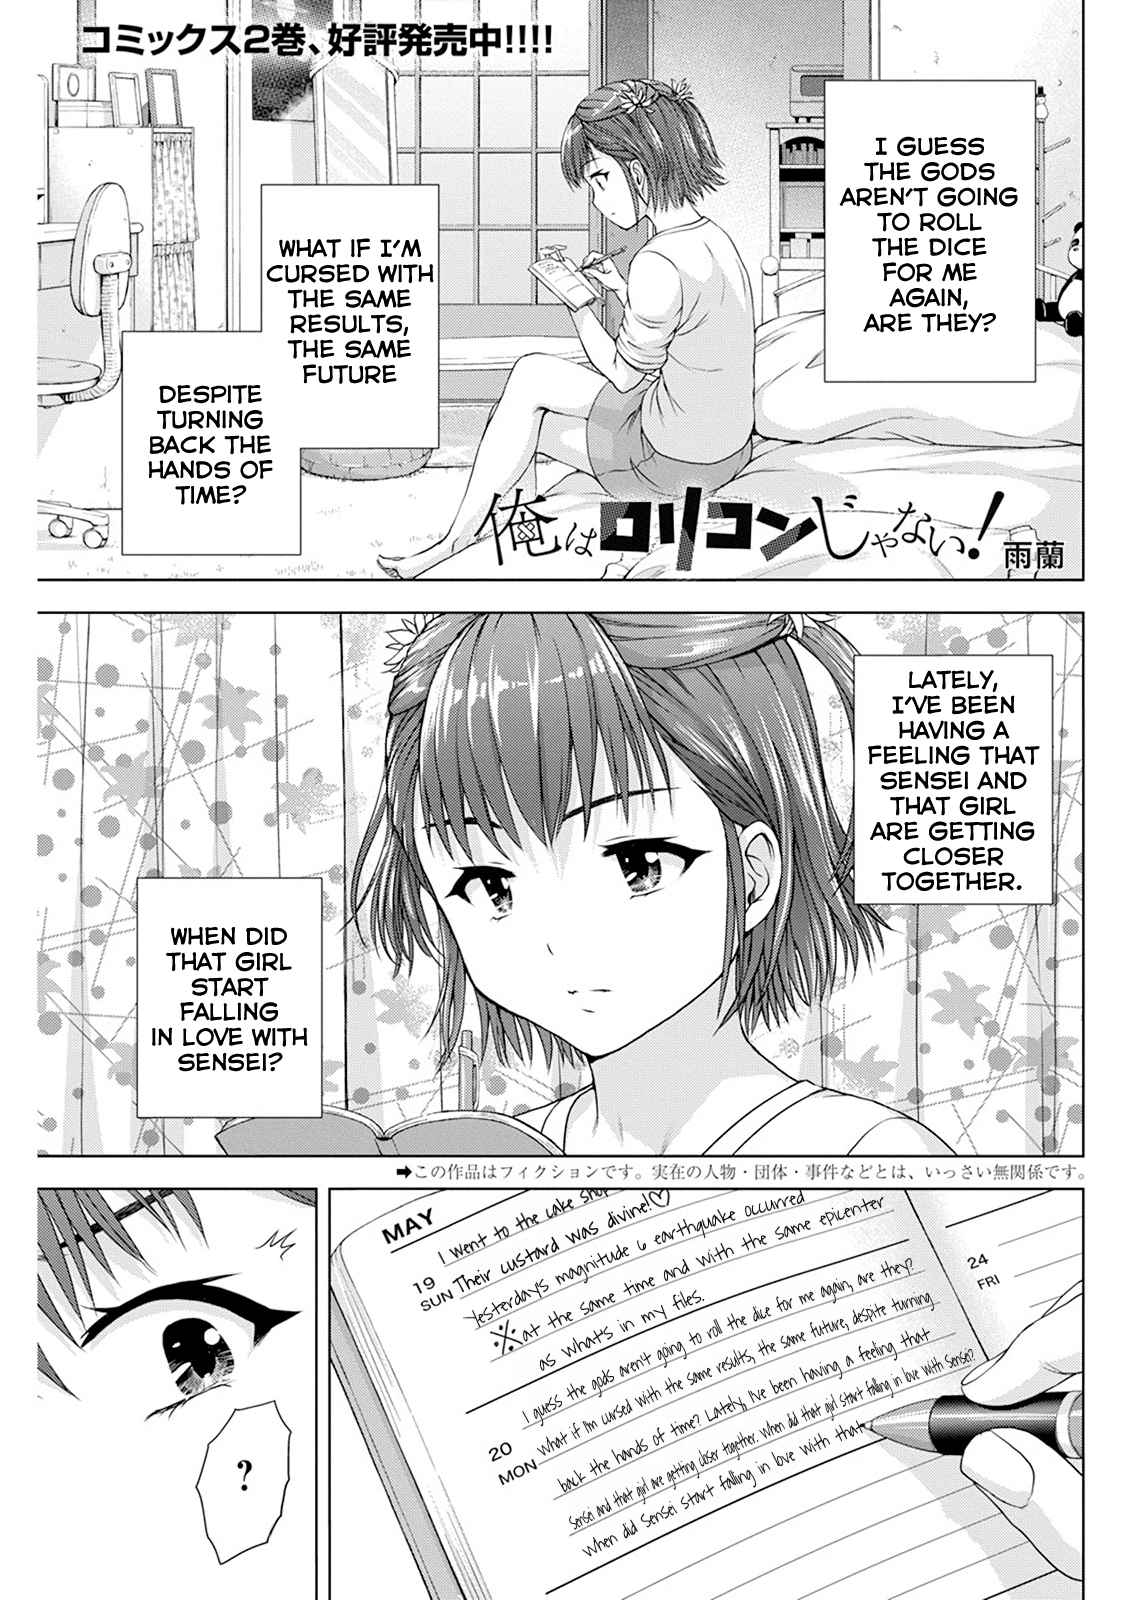 I'm Not a Lolicon! Vol. 3 Ch. 20 A Young Girl's Secret